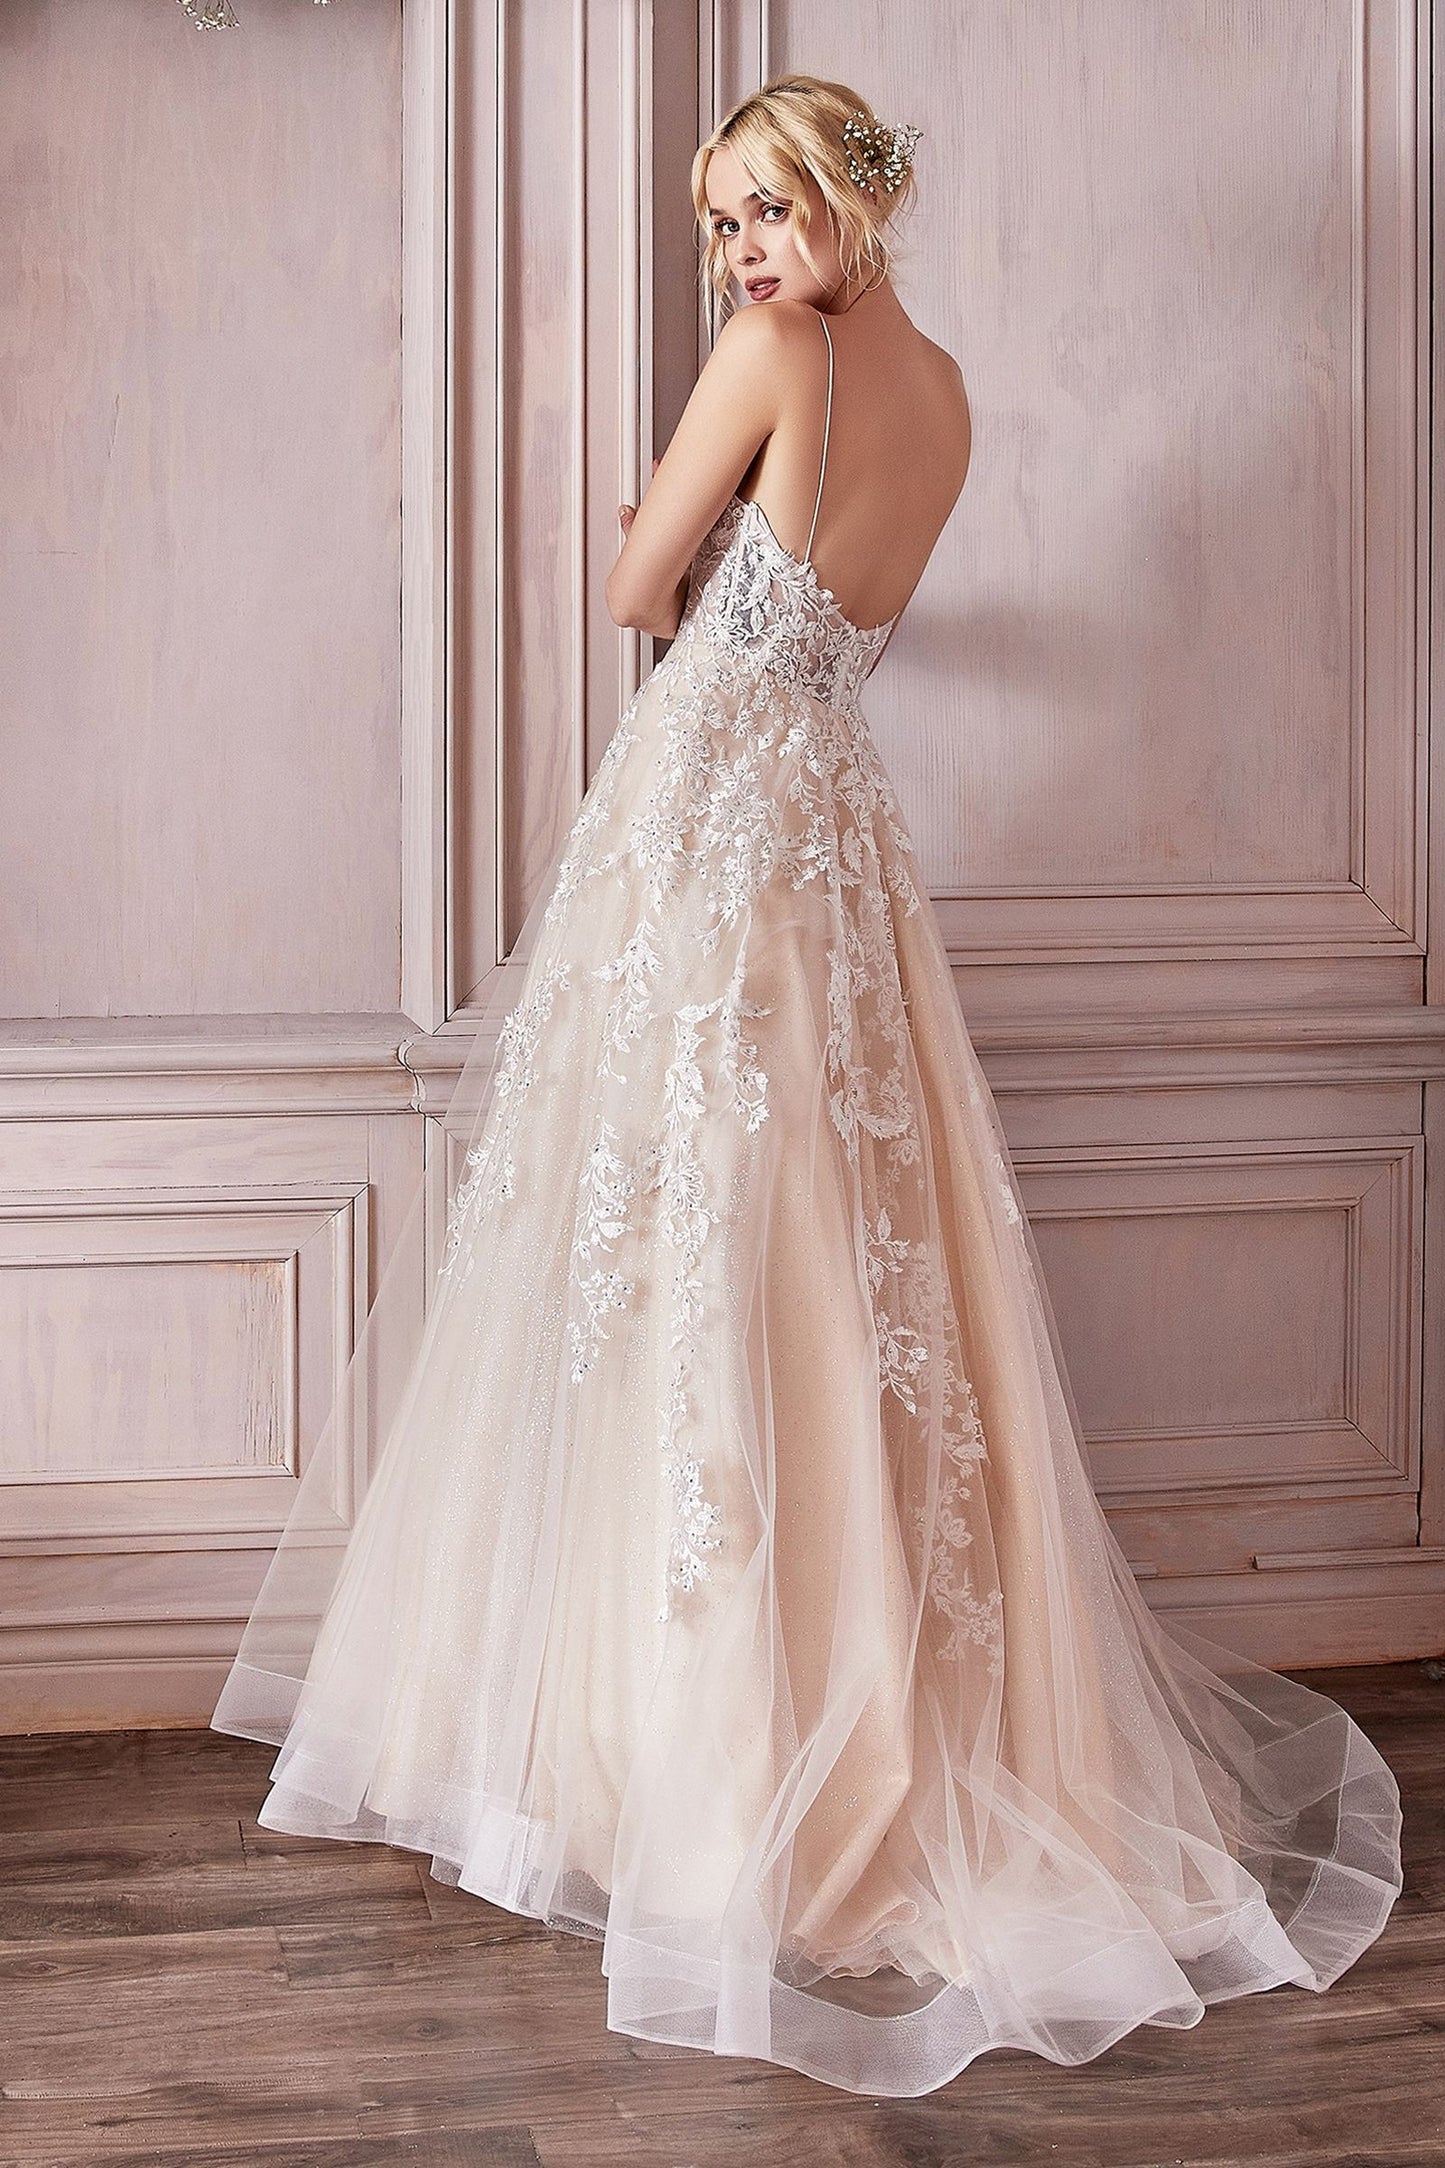 Champagne Bridal Ball Gown